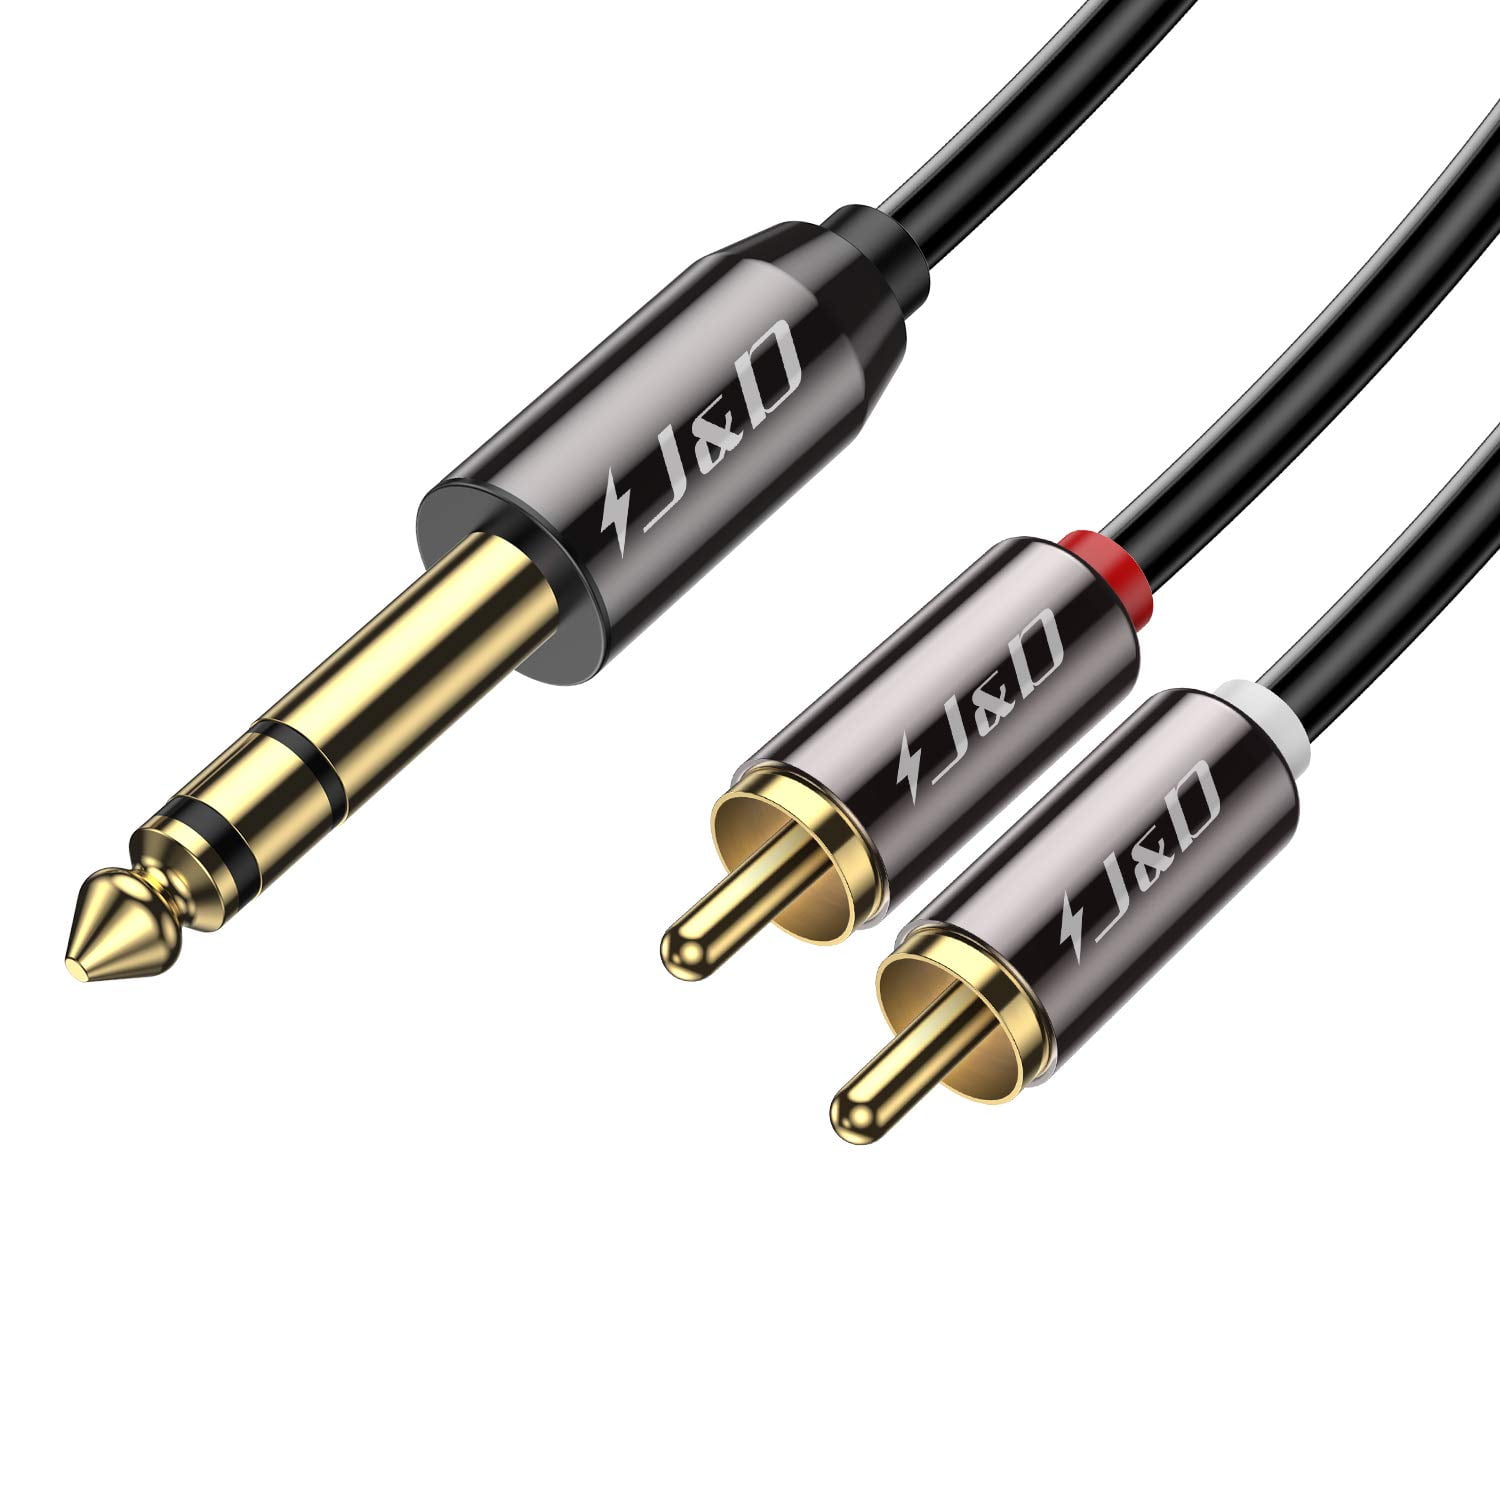 3ft (0.9m) Value Series™ RCA Stereo Audio Cable, Audio Cables, AV Cables